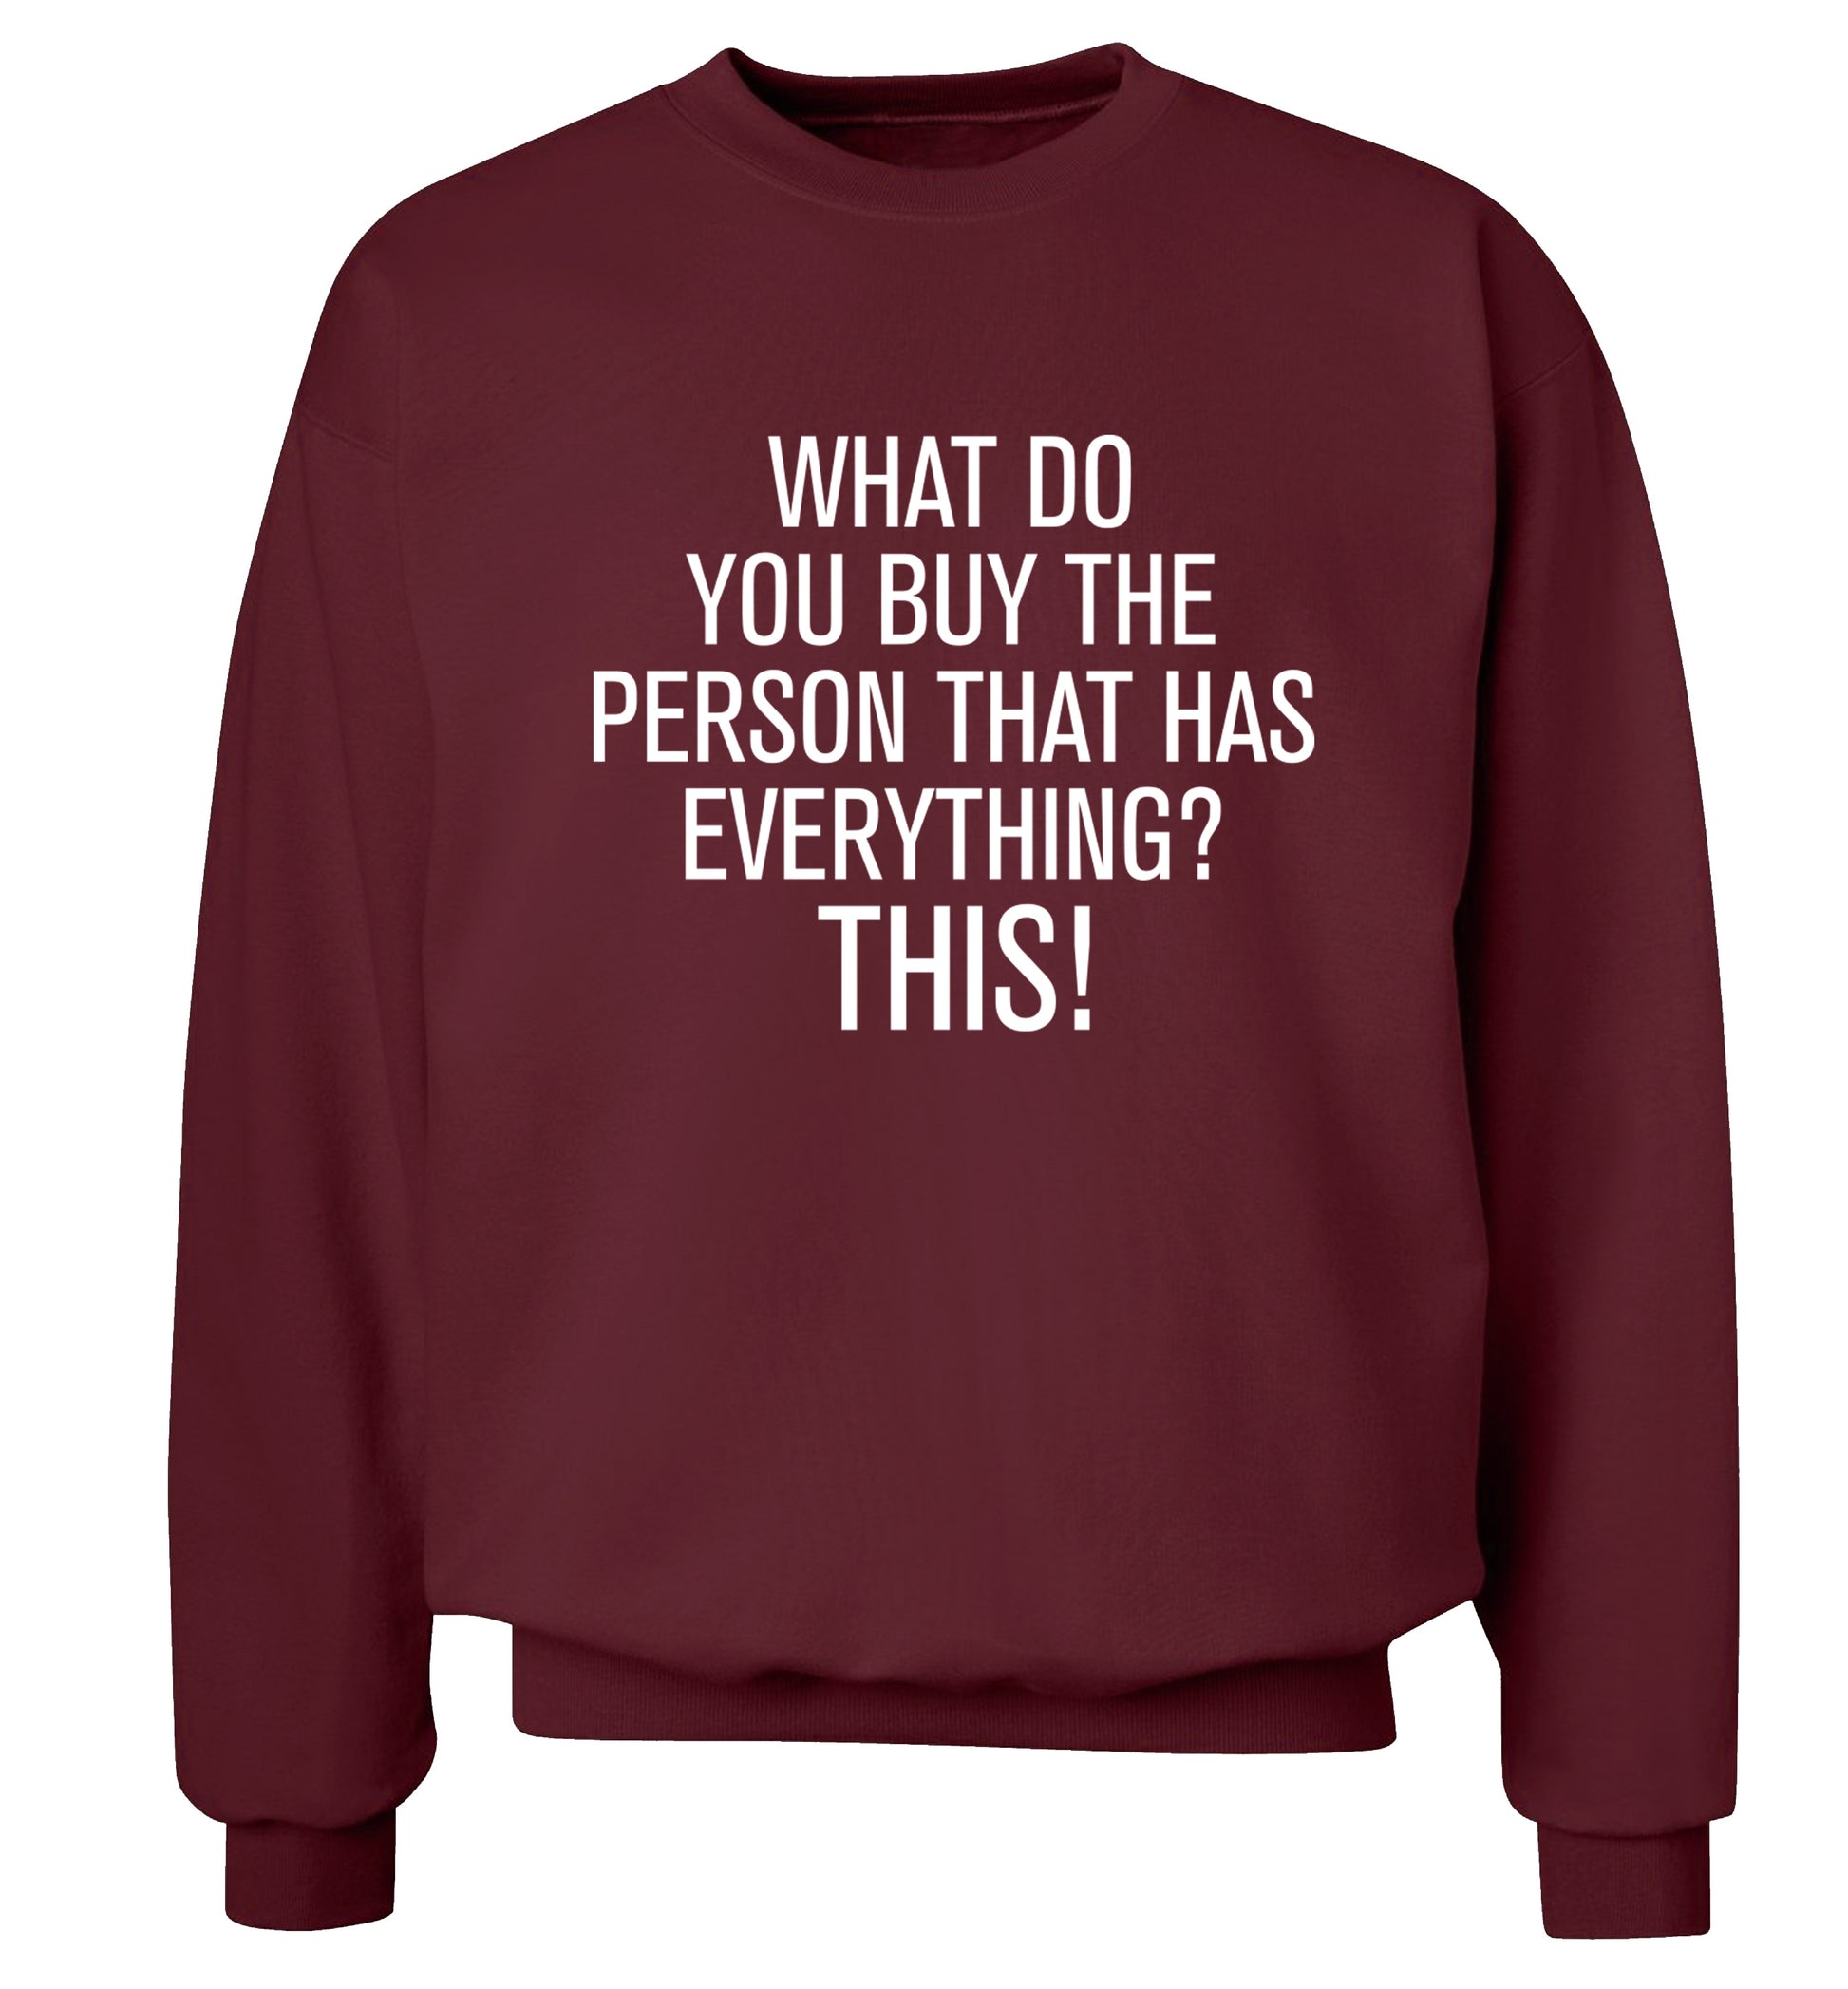 What do you buy the person that has everything? This! Adult's unisex maroon Sweater 2XL